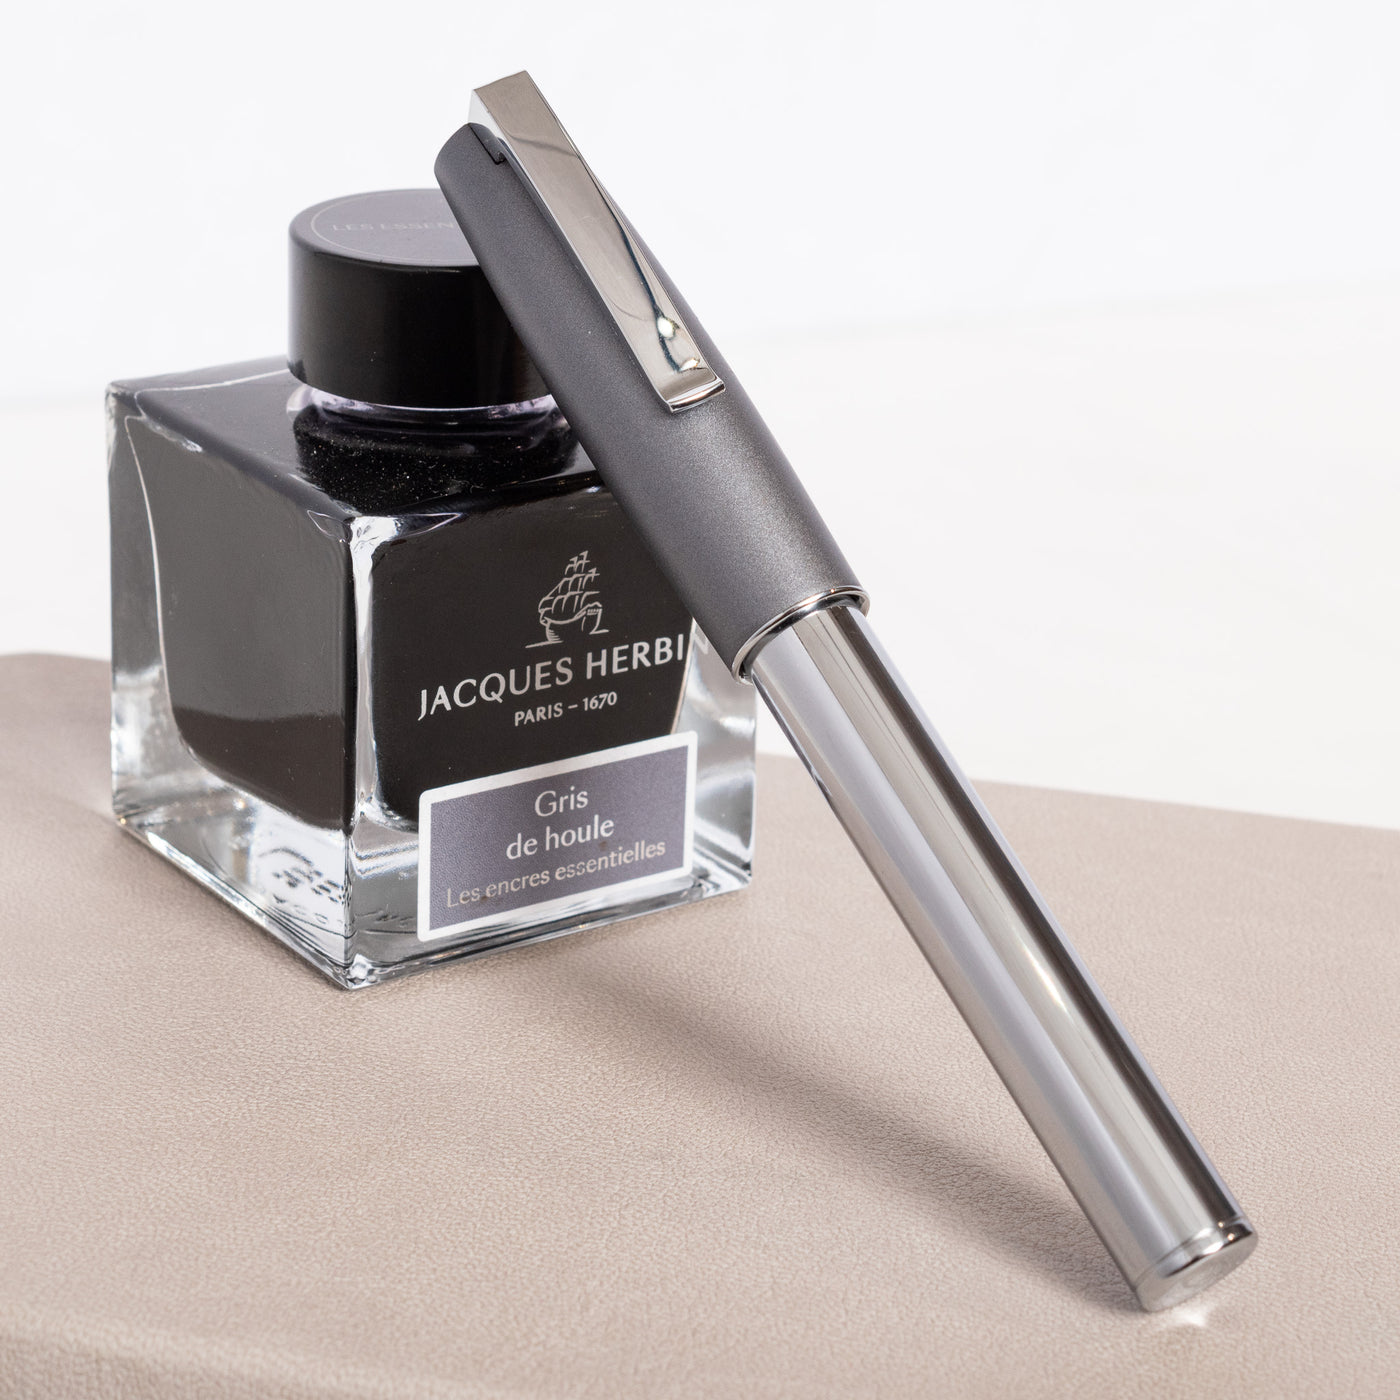 Faber-Castell Loom Metallic Grey Fountain Pen capped